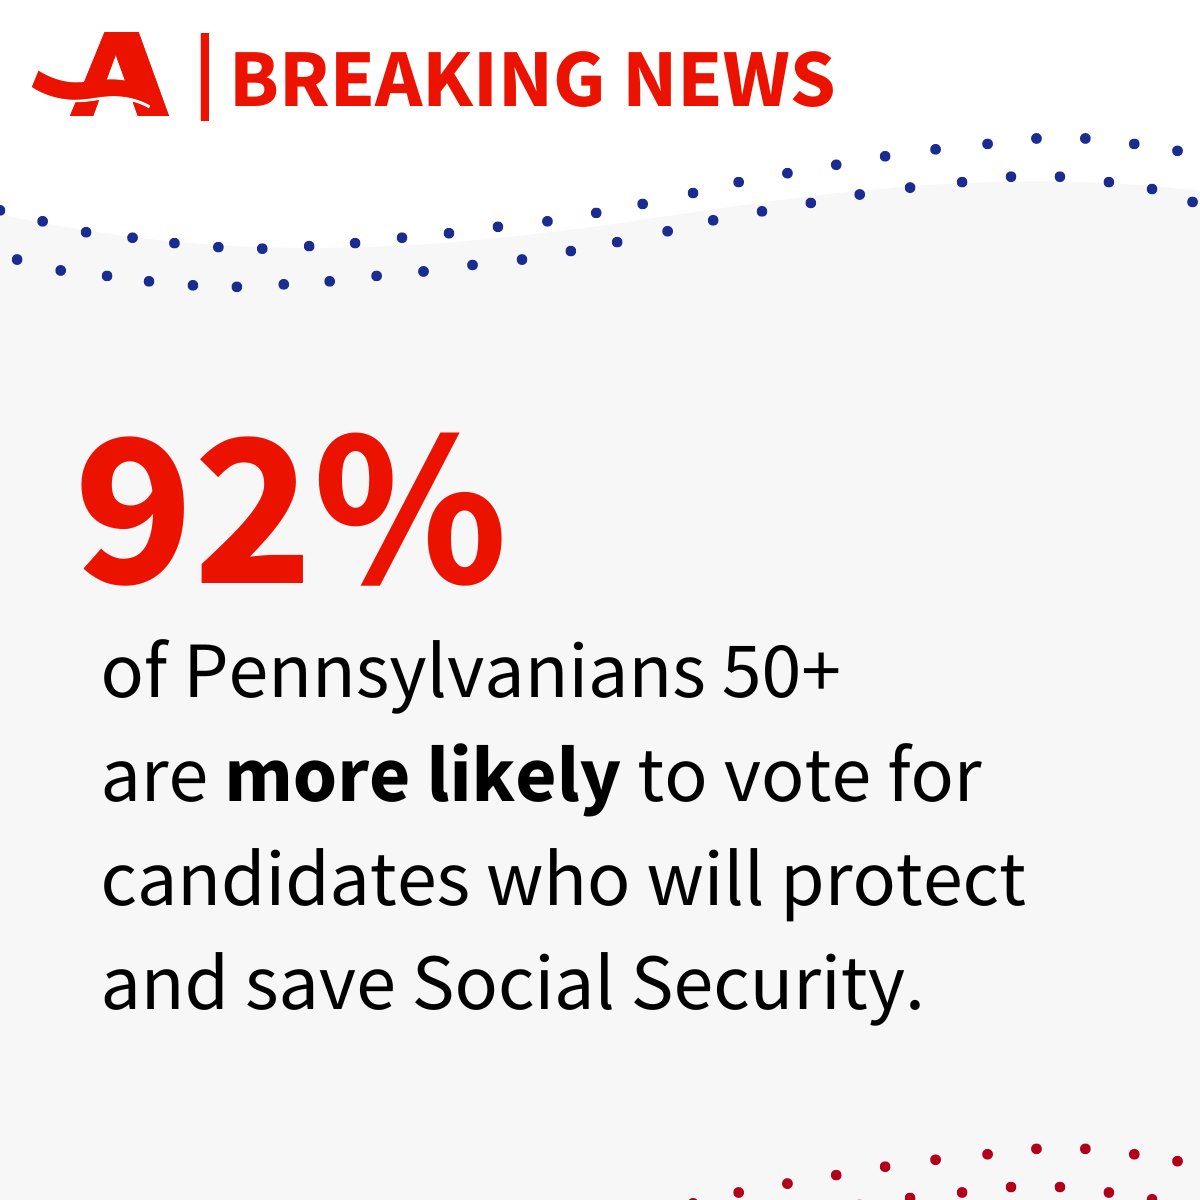 Social Security matters. In a new AARP poll of PA voters aged 50+, 92% are looking for candidates to protect their Social Security benefits earned through a lifetime of hard work. Learn what’s at stake for 50+ voters this election season by visiting spr.ly/6015jUgzd.